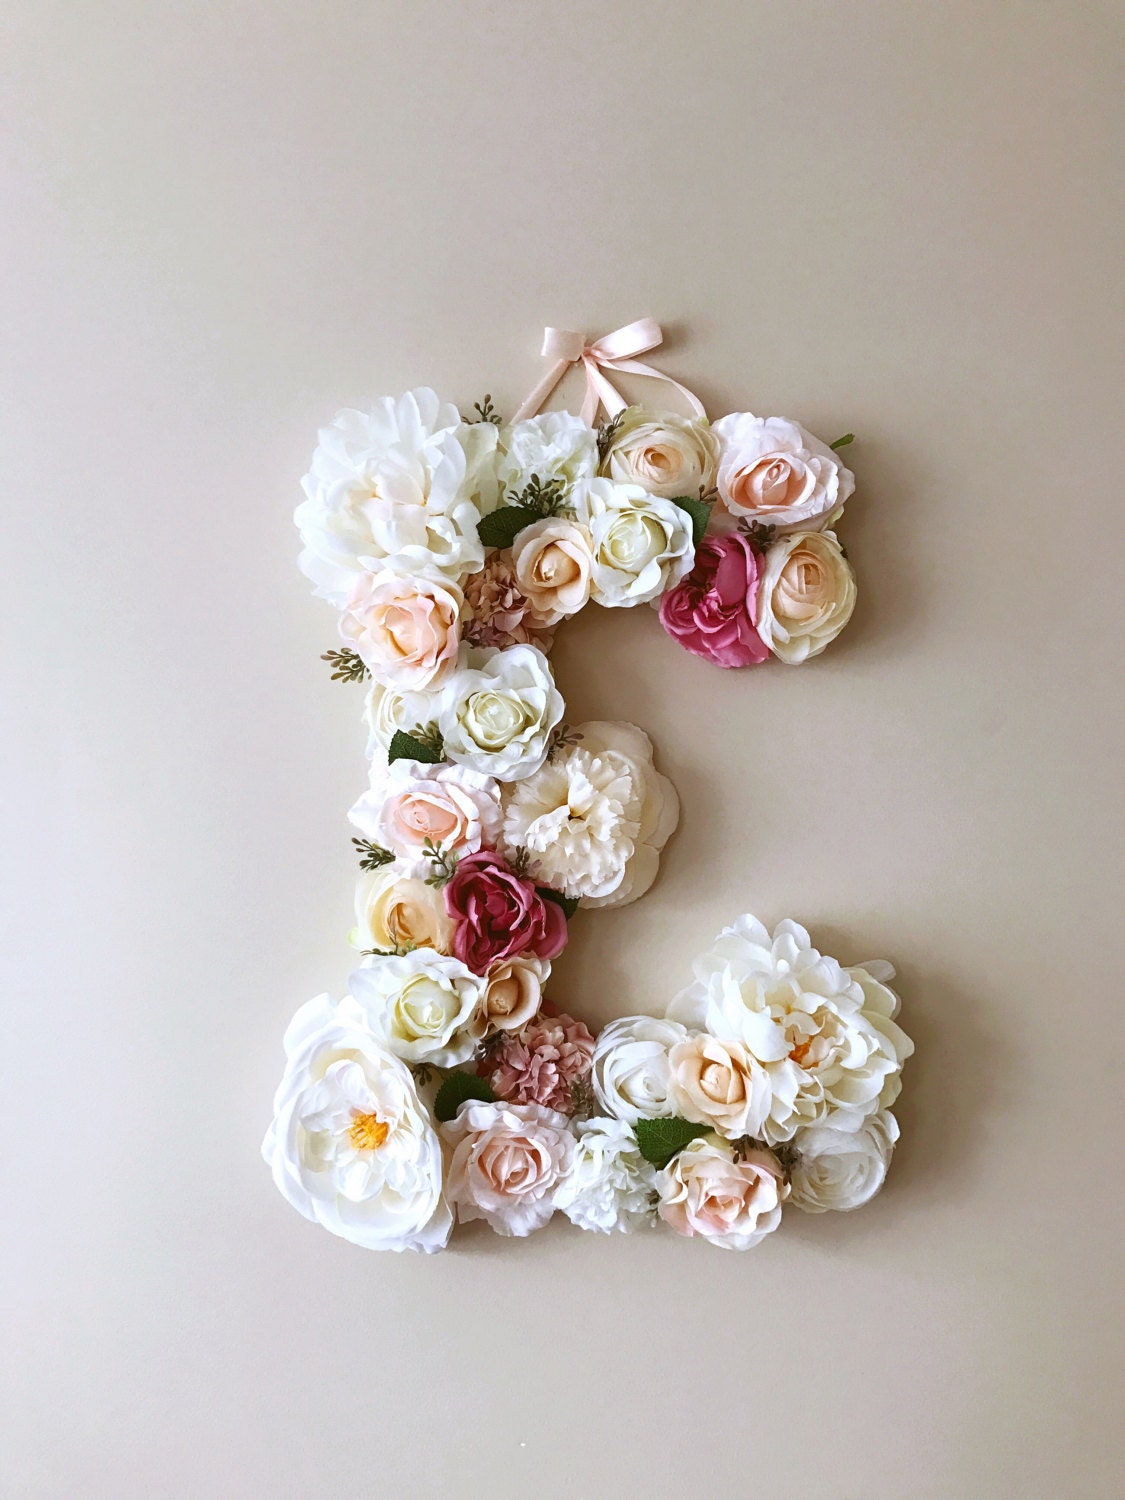 Large Flower Letters, Wall letter, Wedding letters, Personalized wall art, Baby shower gift, Artificial silk flower letters, Photo prop